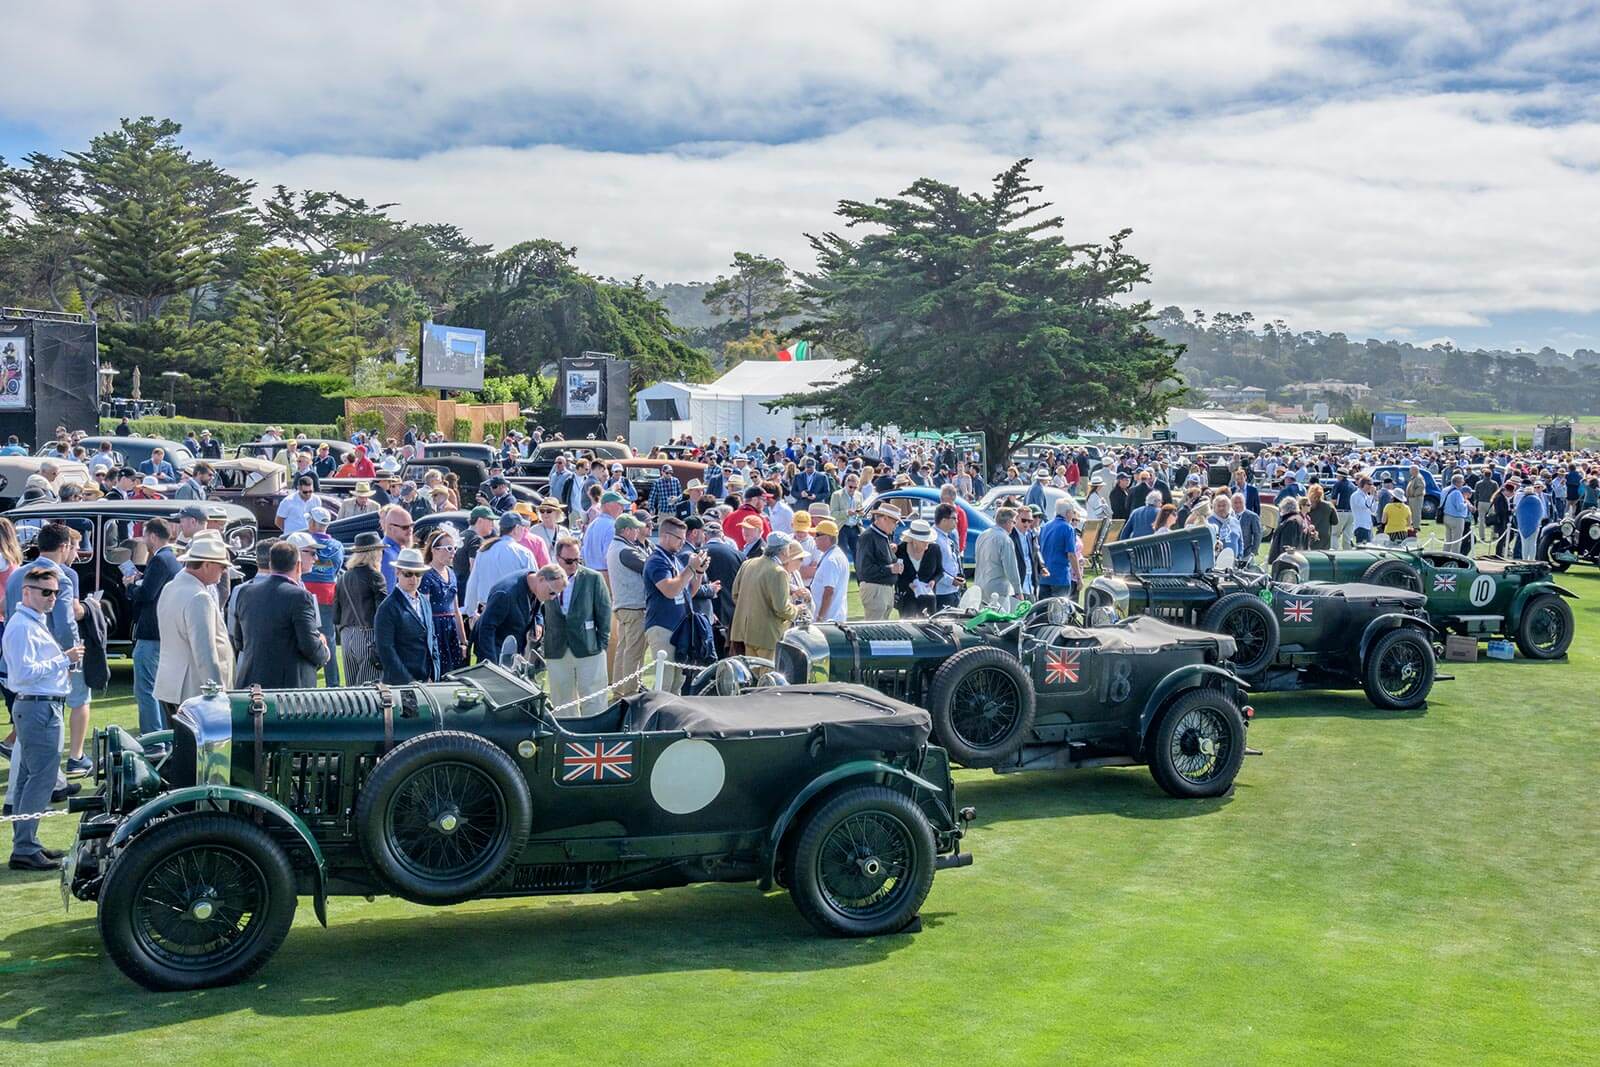 Bentleys on the Show Field at the Pebble Beach Concours d'Elegance 2019